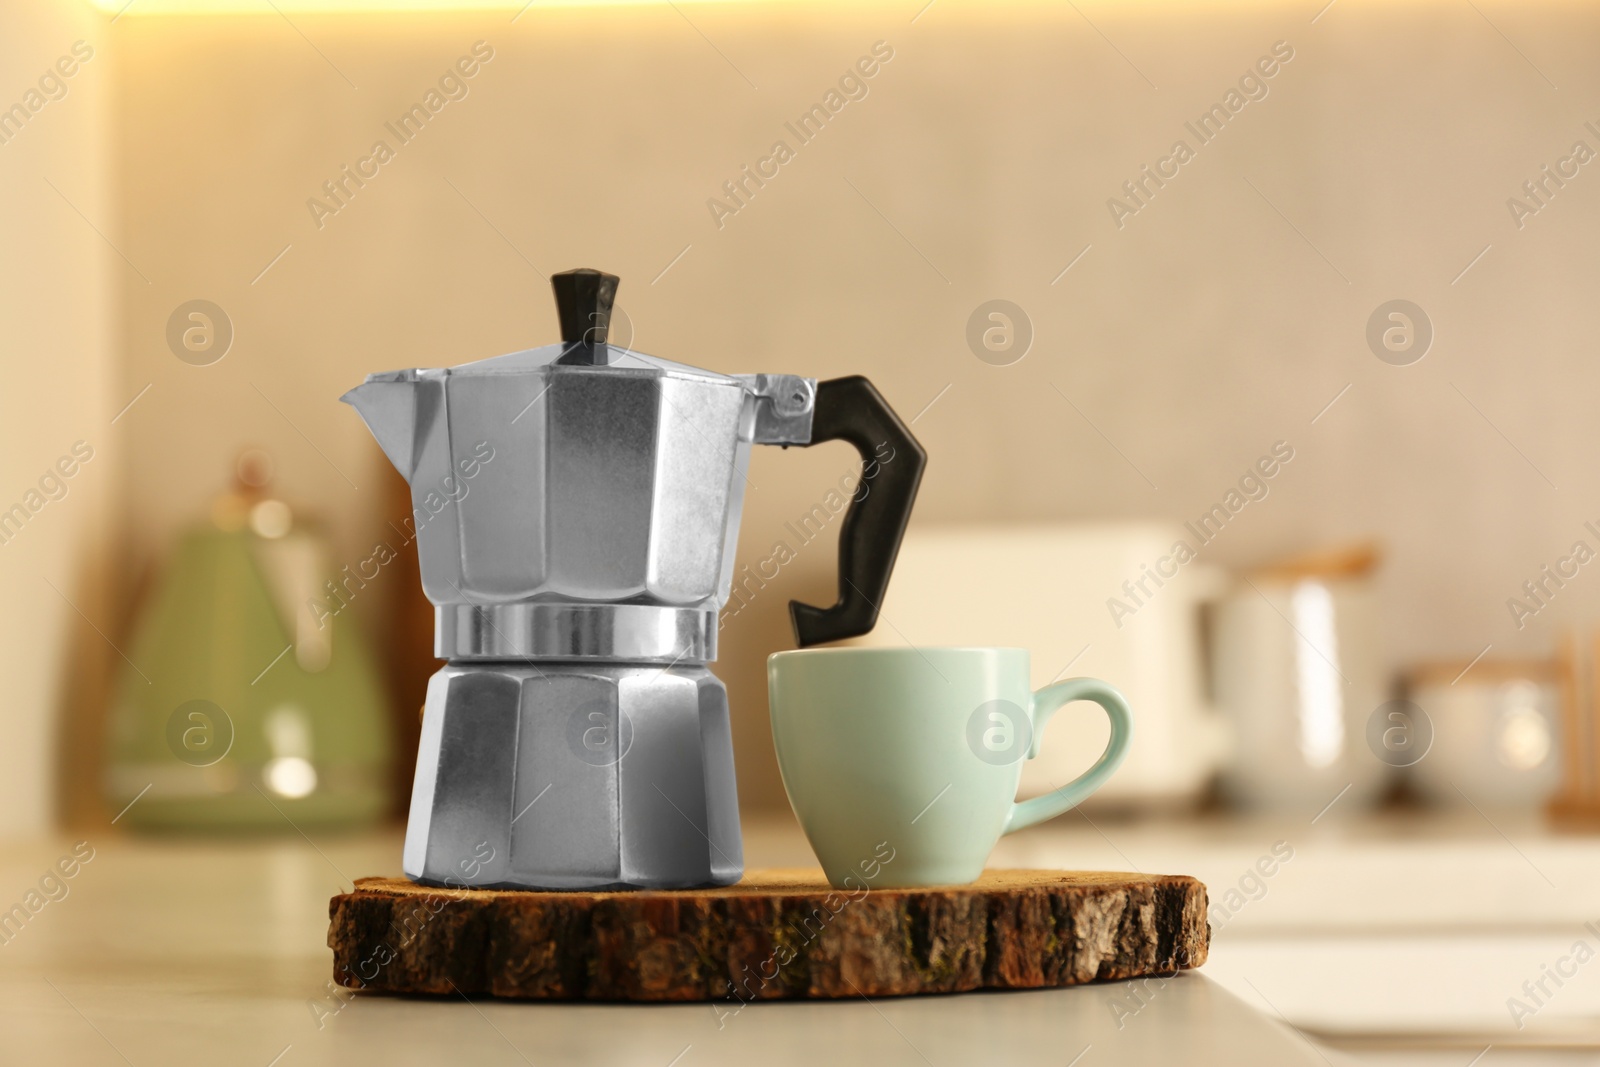 Photo of Cup of coffee and moka pot on light table in kitchen